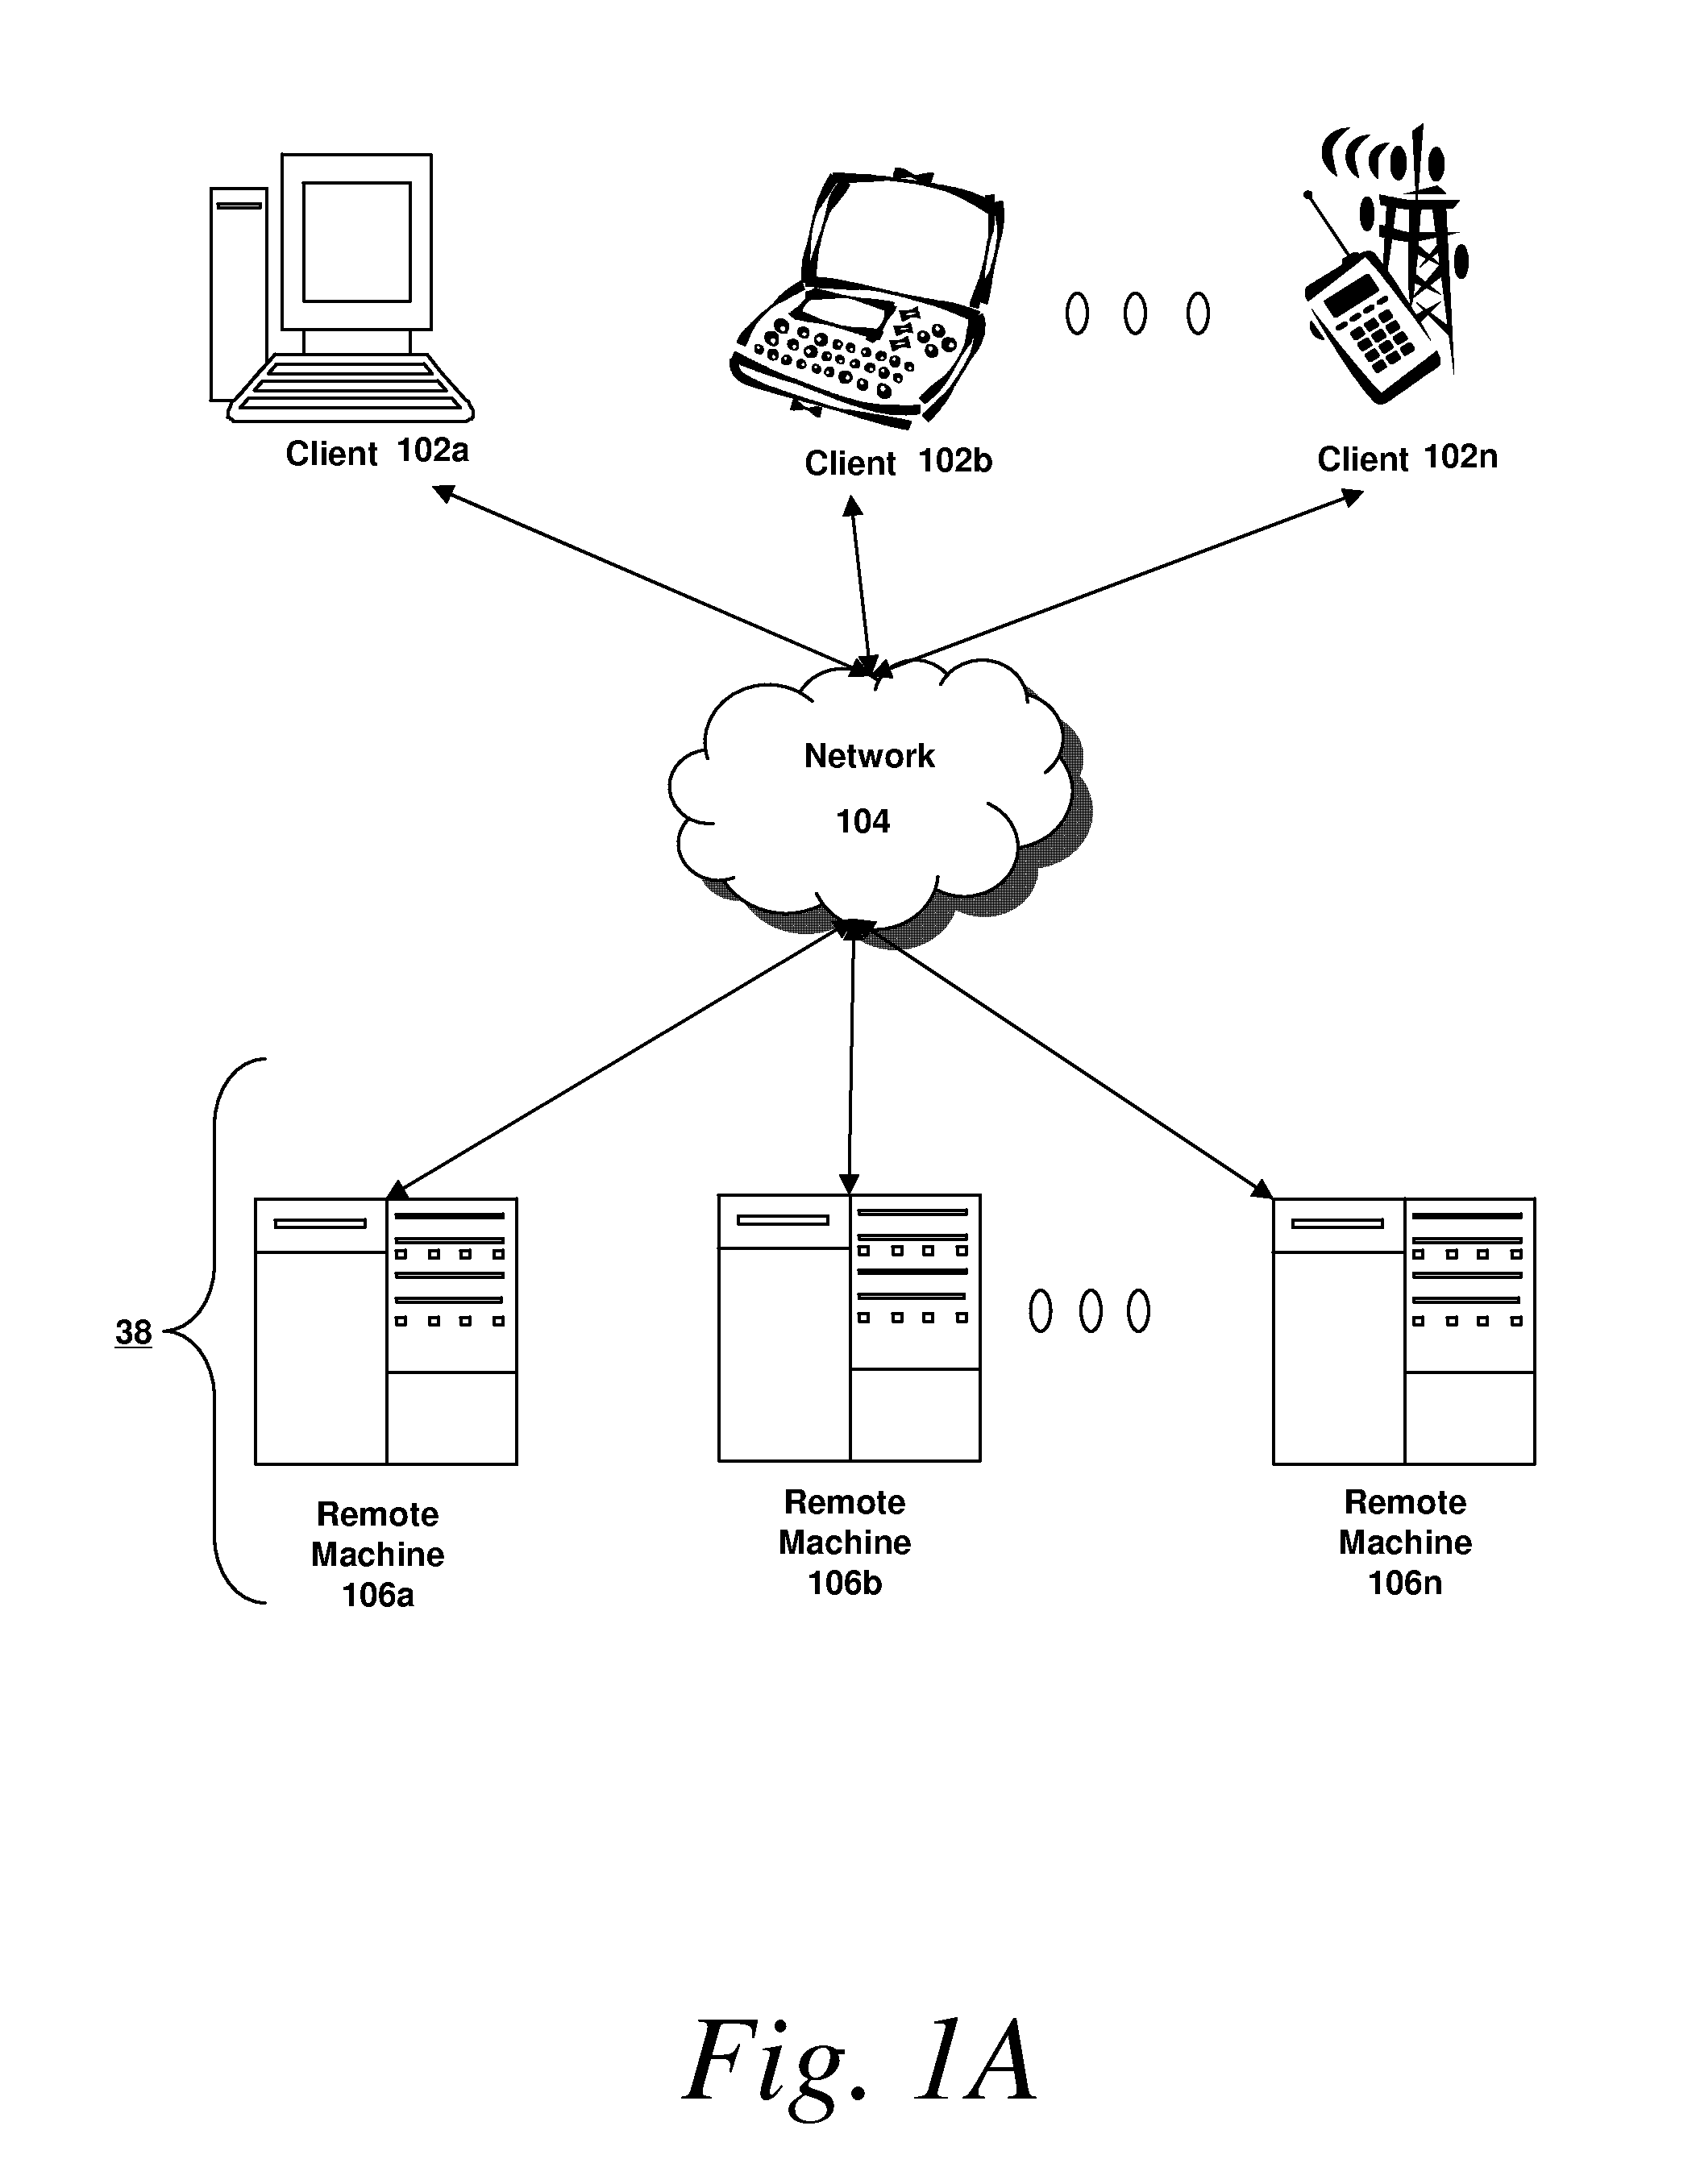 Methods and Systems for Distributing Cryptographic Data to Authenticated Recipients